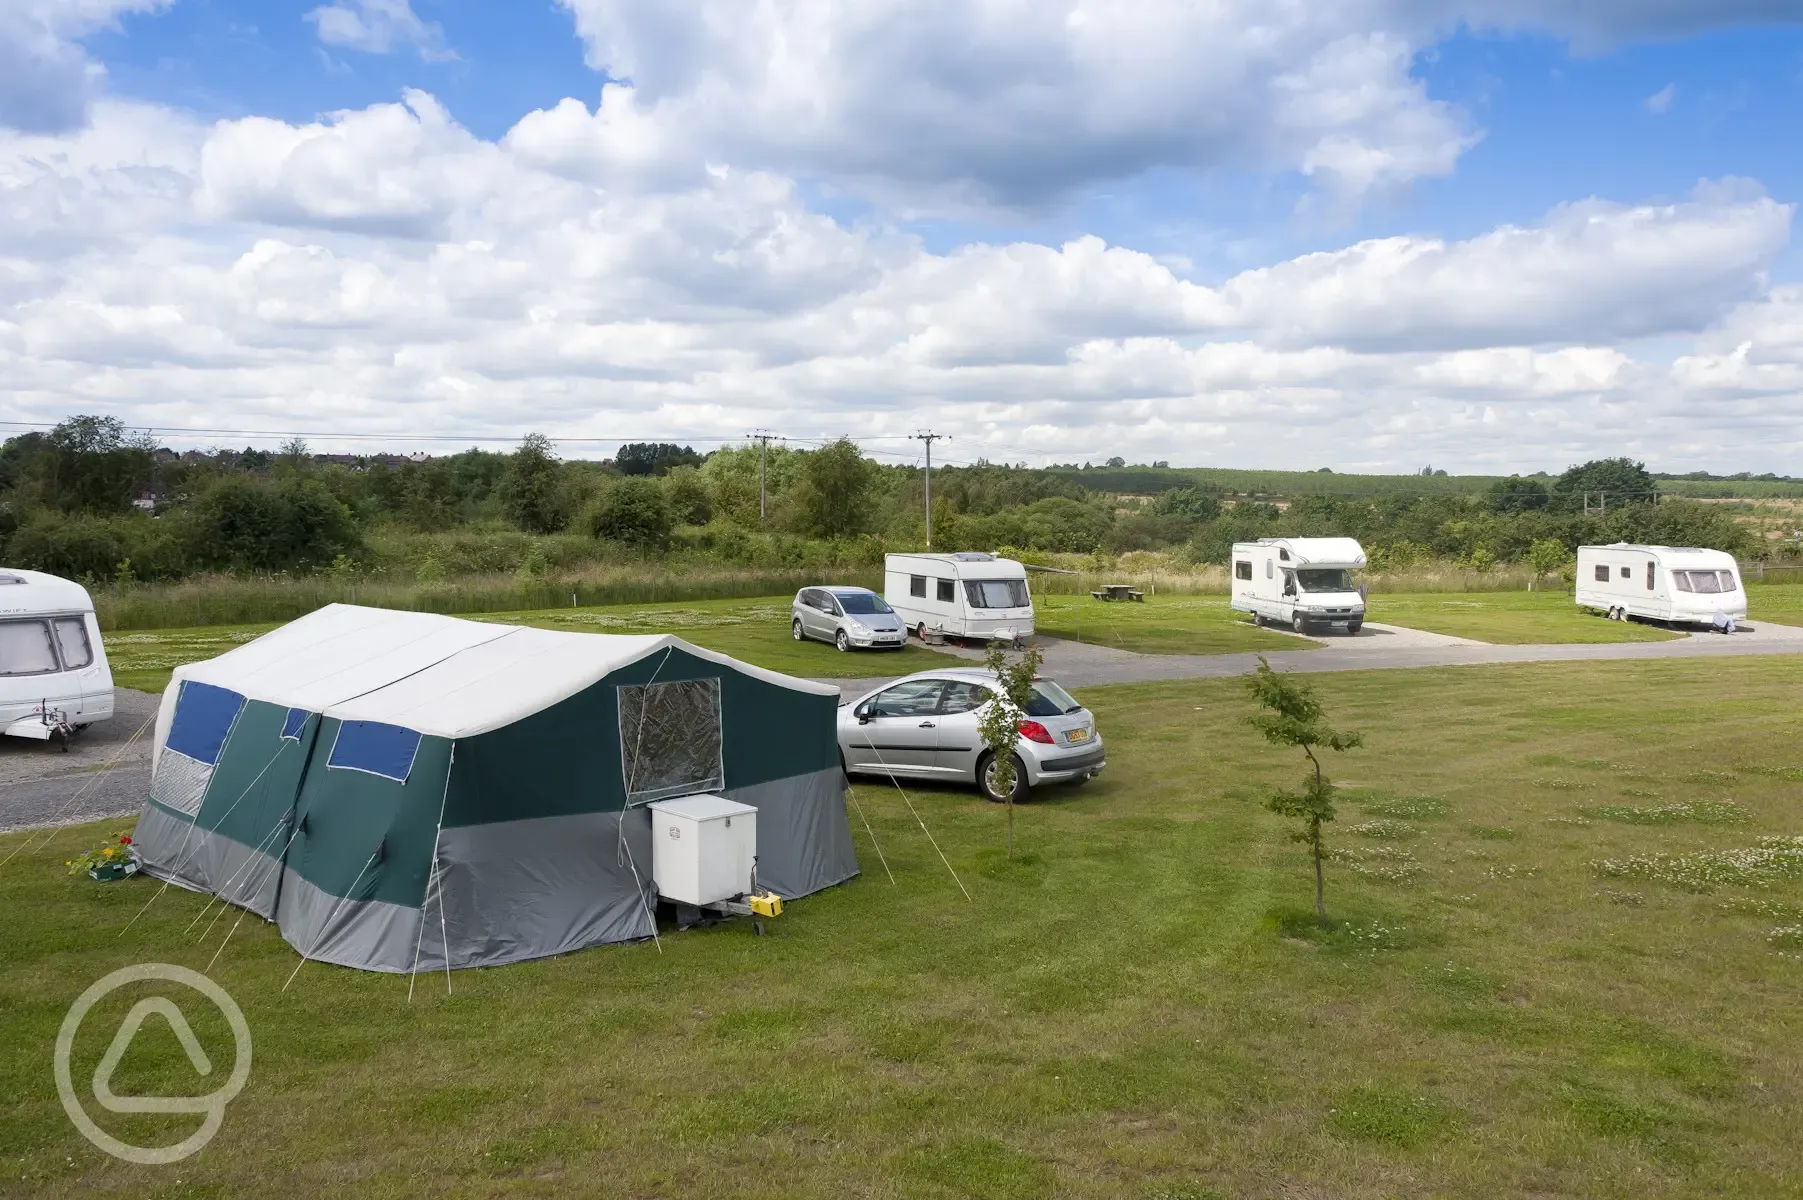 View of pitched tents